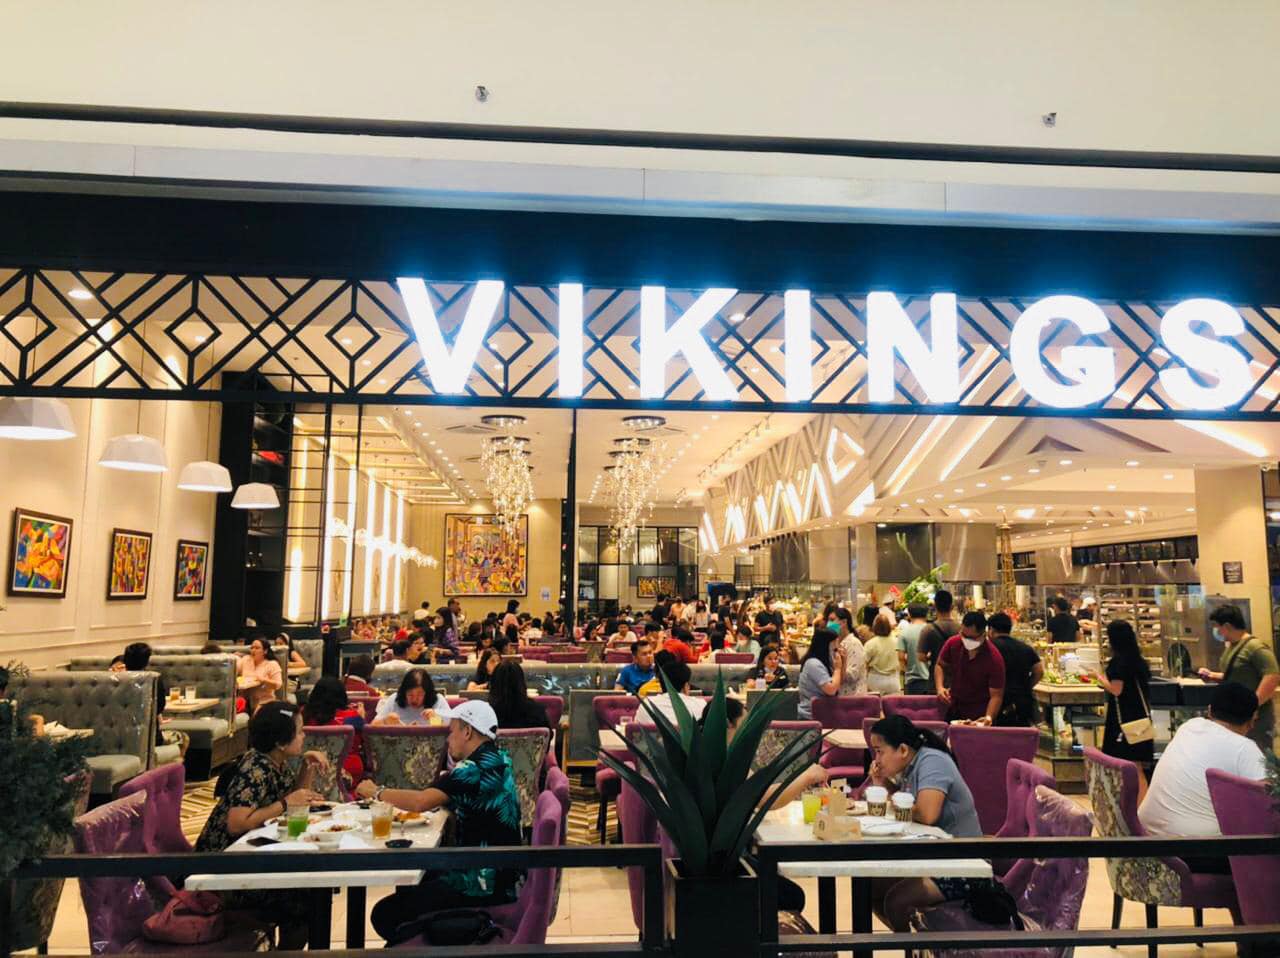 Vikings SM Pampanga Price Decide if it's Worth Your Money Where In